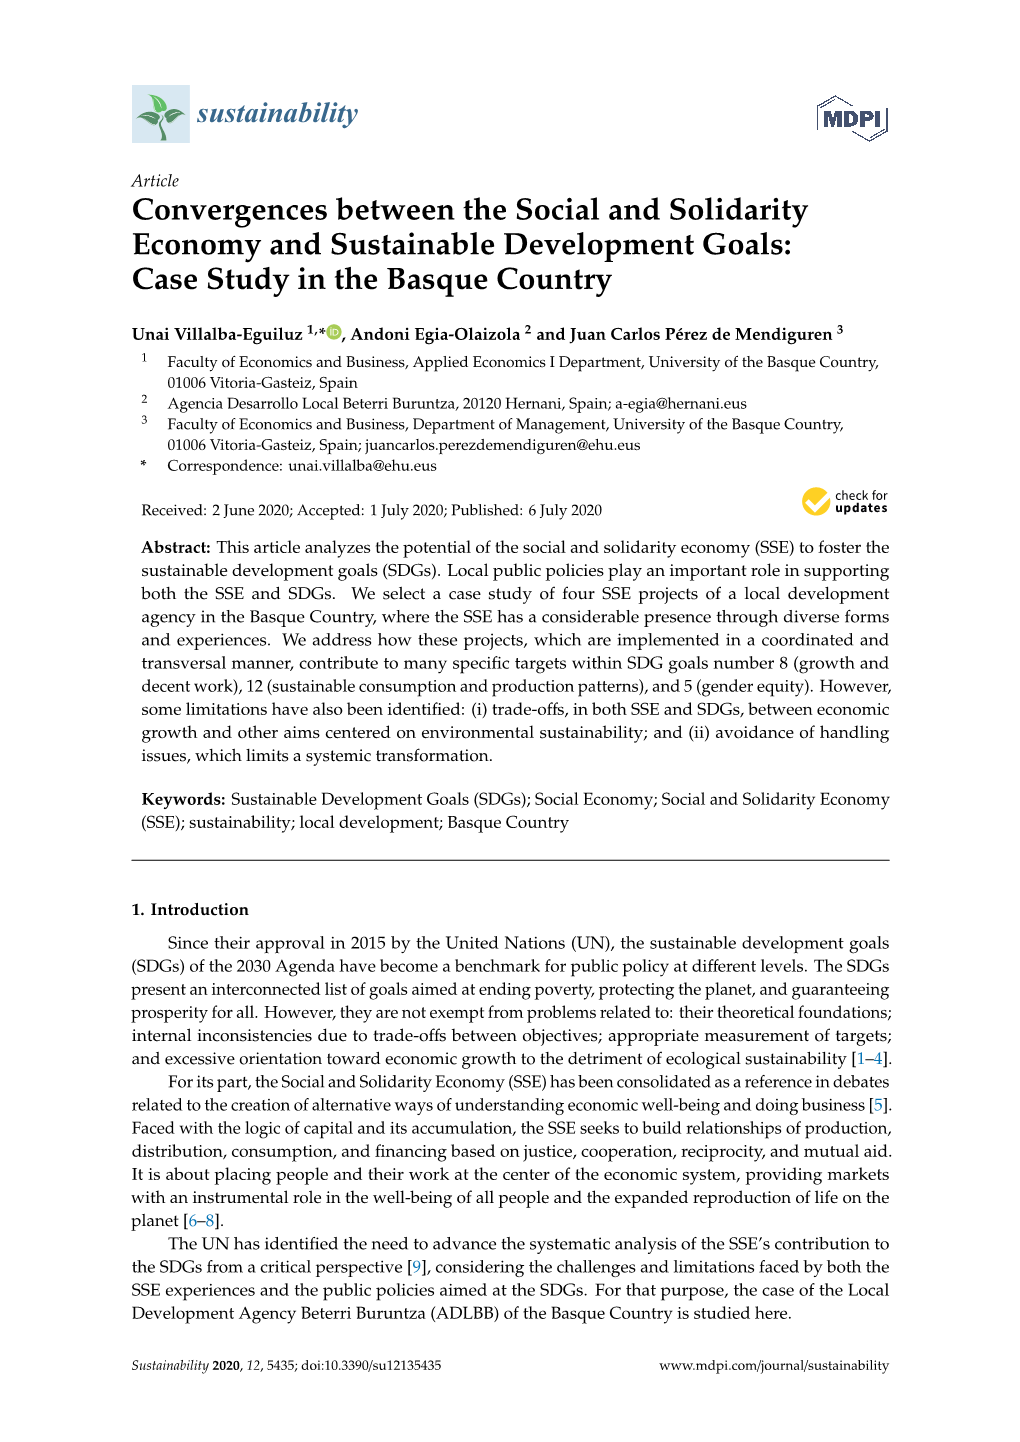 Convergences Between the Social and Solidarity Economy and Sustainable Development Goals: Case Study in the Basque Country